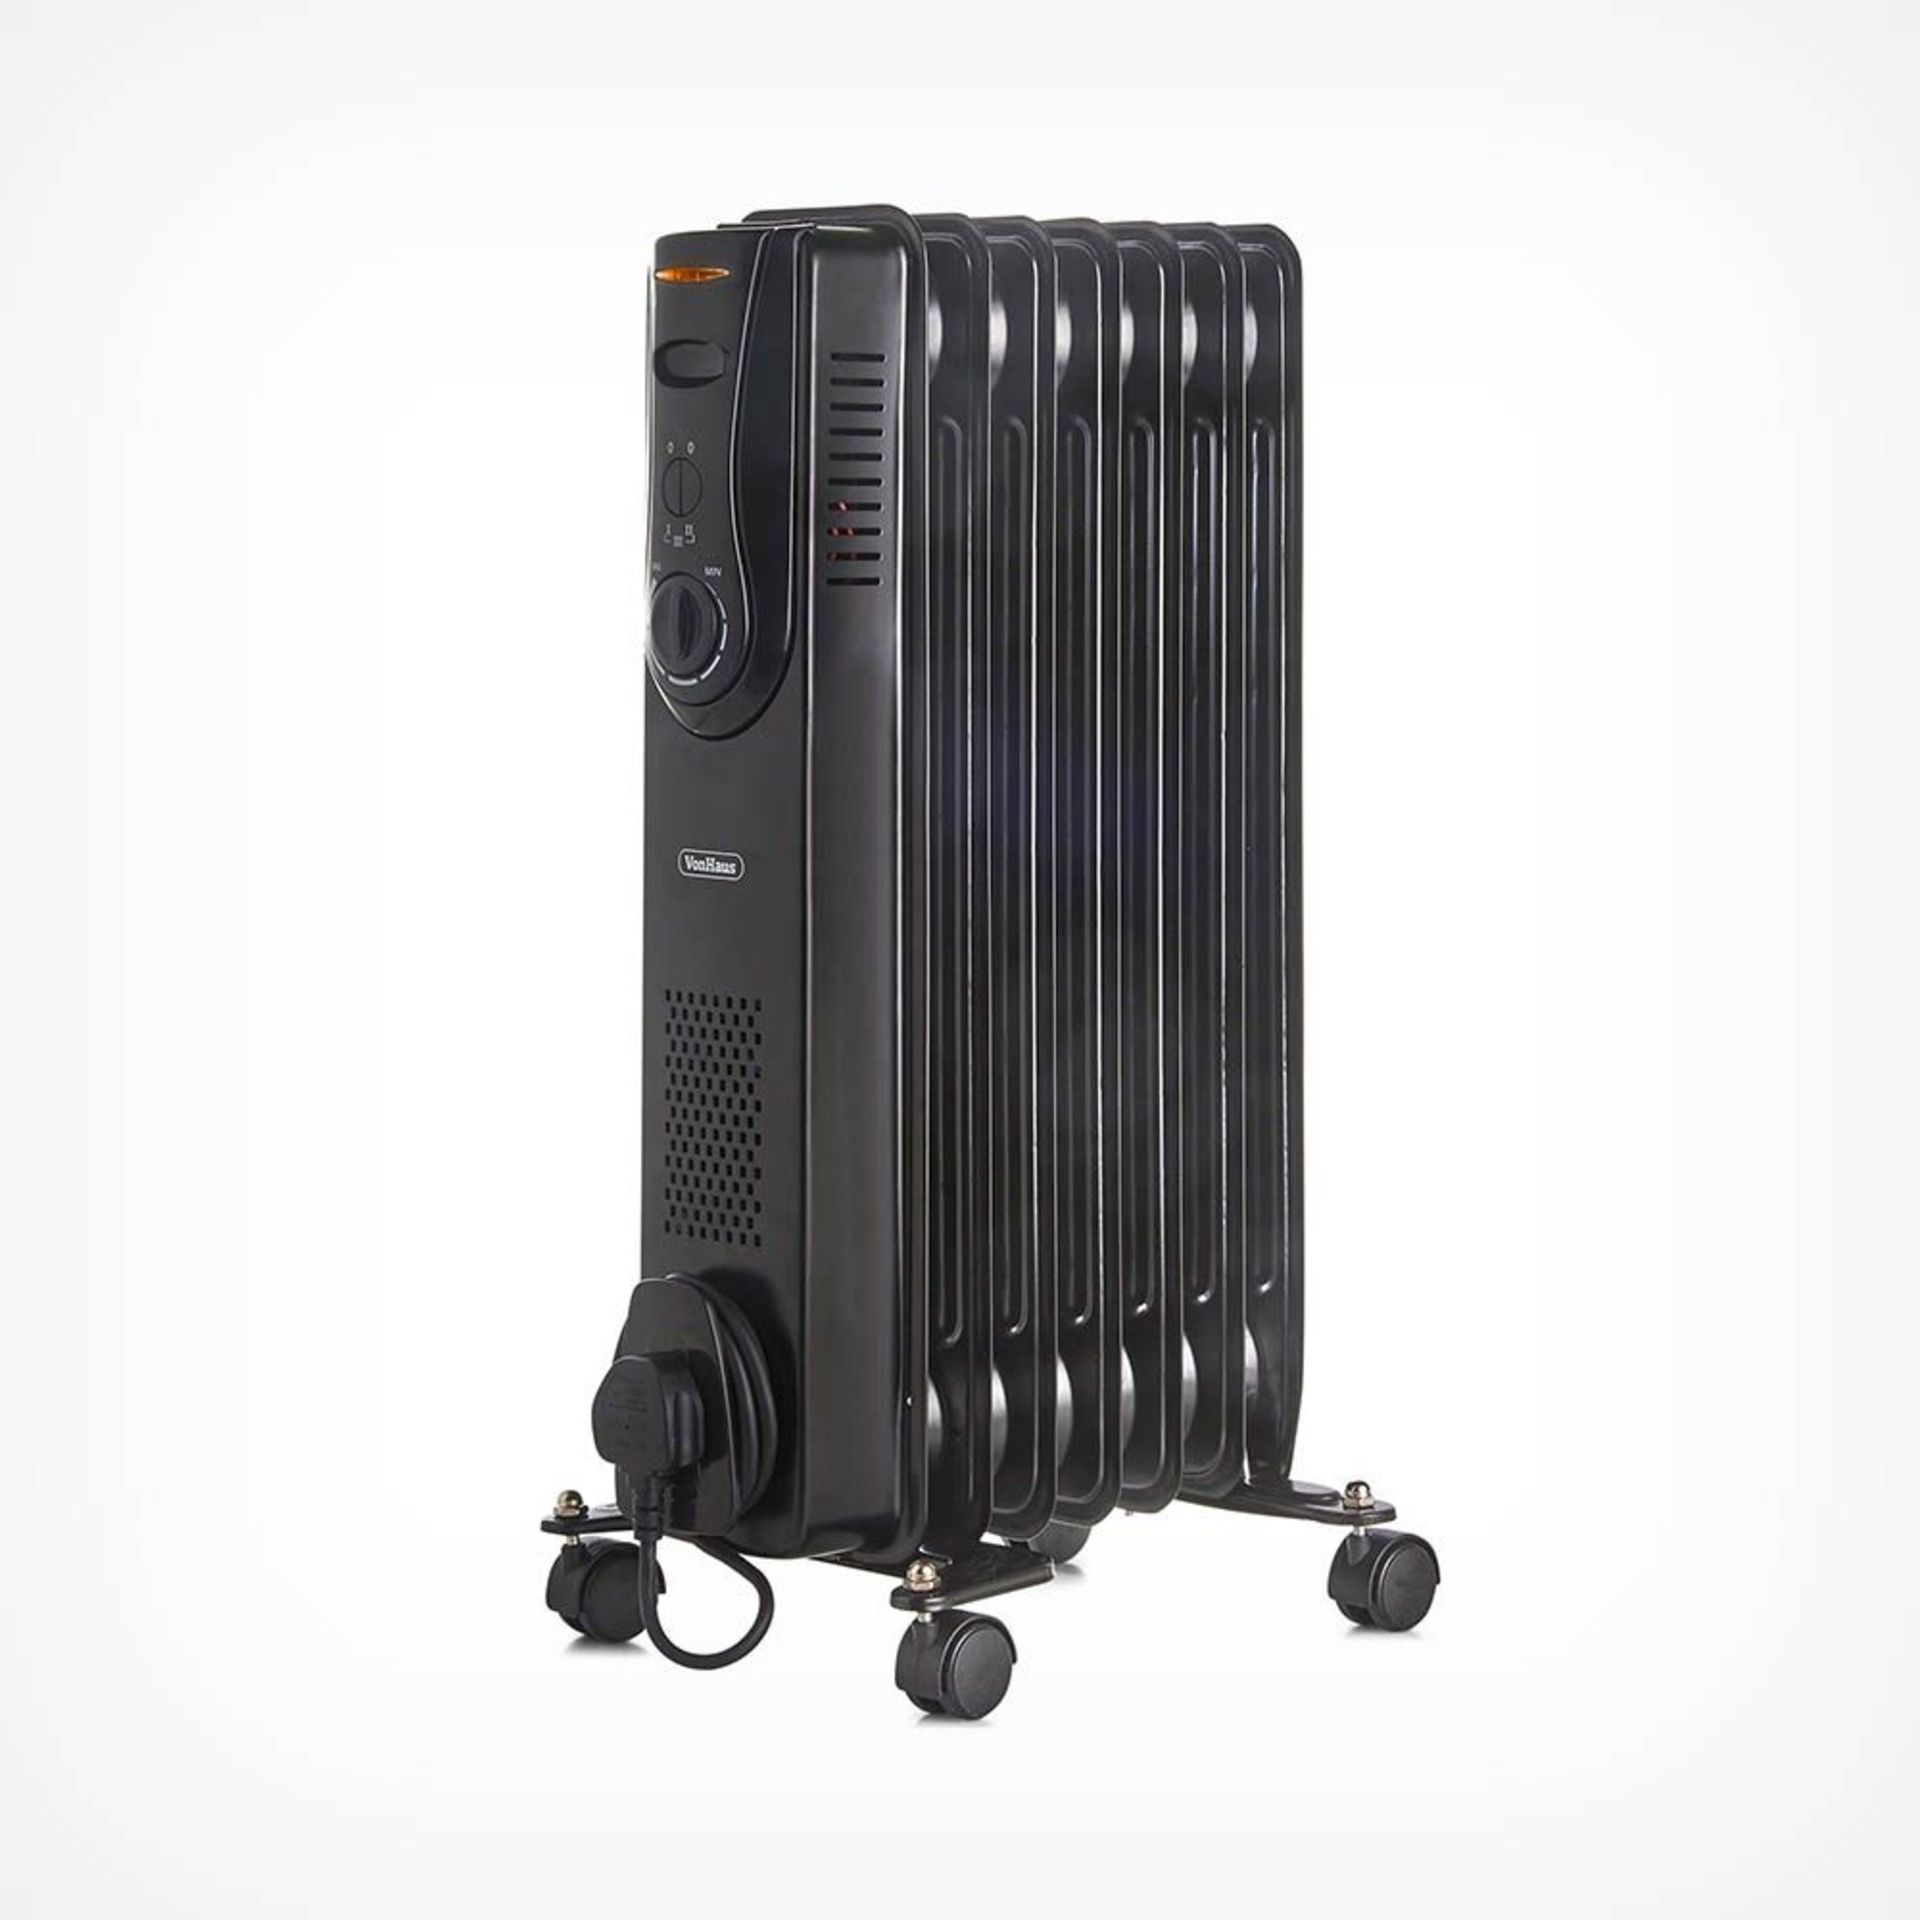 (DD71) 7 Fin 1500W Oil Filled Radiator - Black Powerful 1500W radiator with 7 oil-filled fins ... - Image 2 of 3